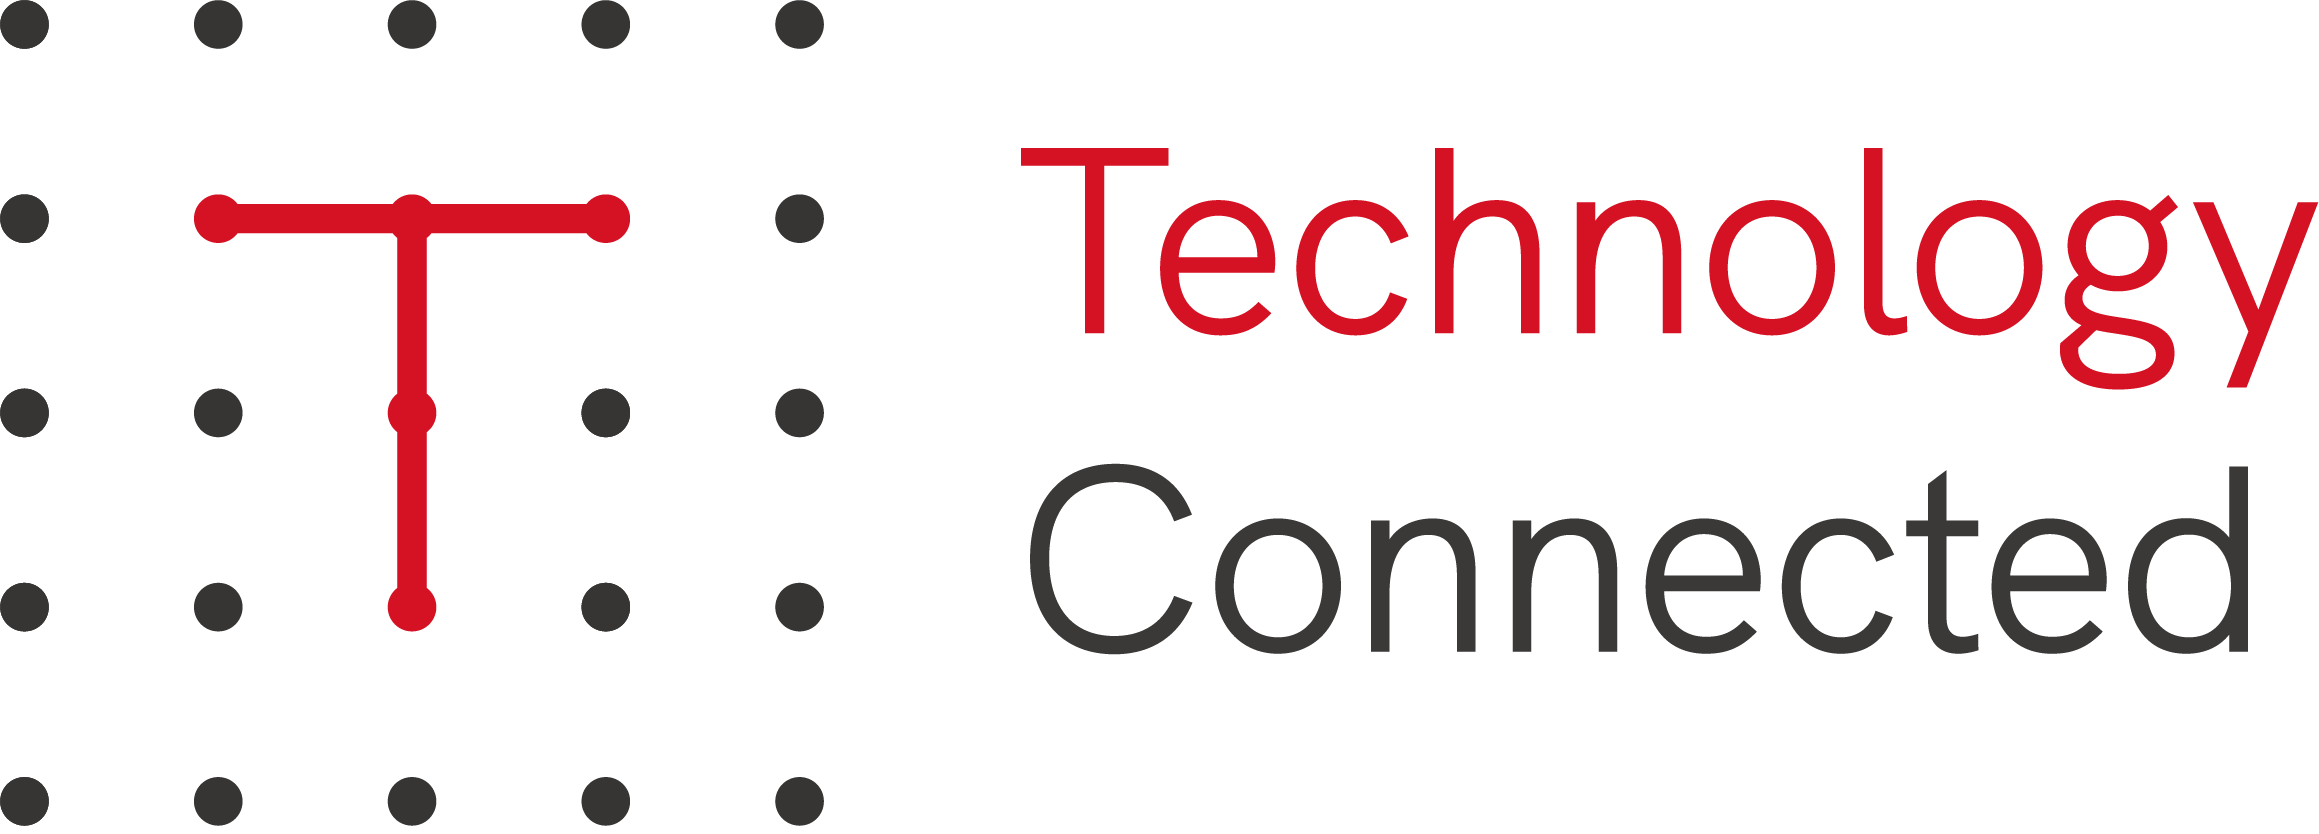 Technology Connected Logo